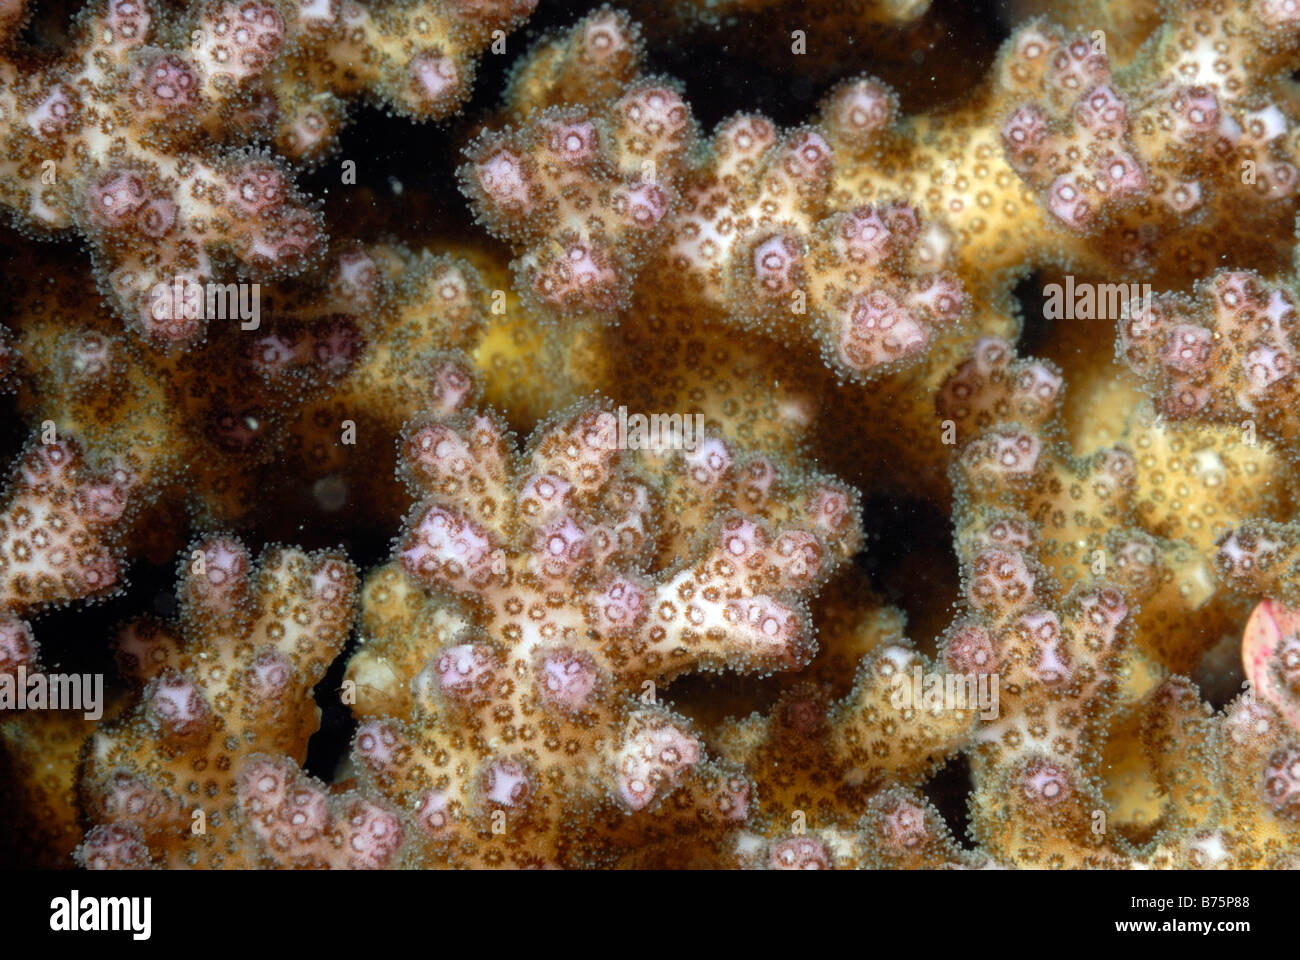 Soft coral polyps Dendronephythya sp. Mahe, Seychelles, Indian Ocean Stock Photo